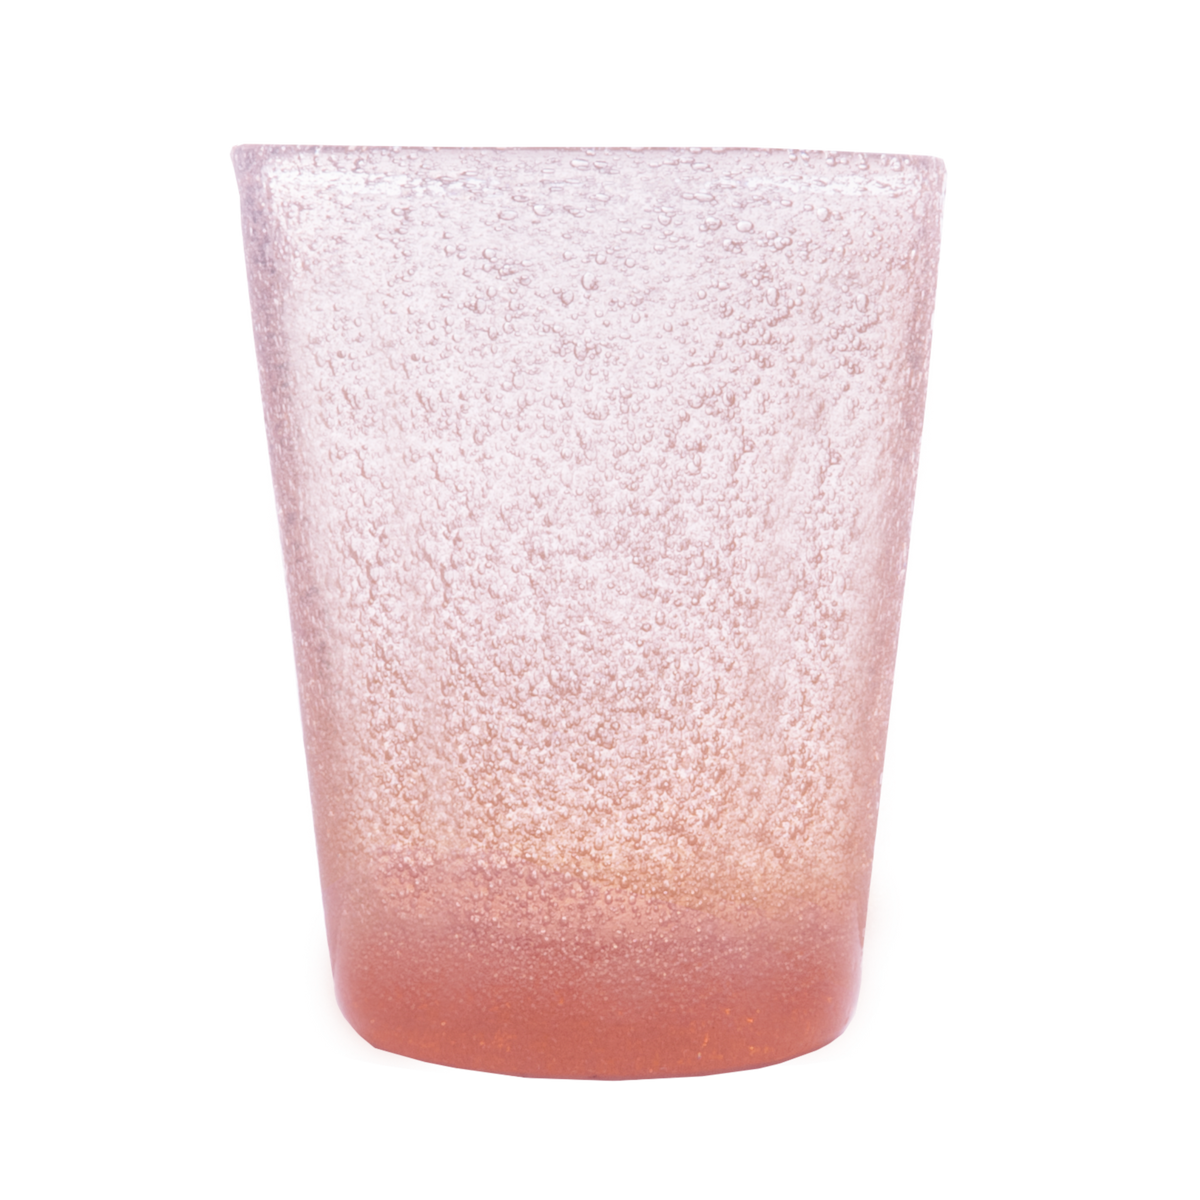 Cheerful, versatile coloured drinking glasses from Memento in Italy. For summer entertaining and everyday use. Decorative bubbles in the glass itself. Colour: Peach